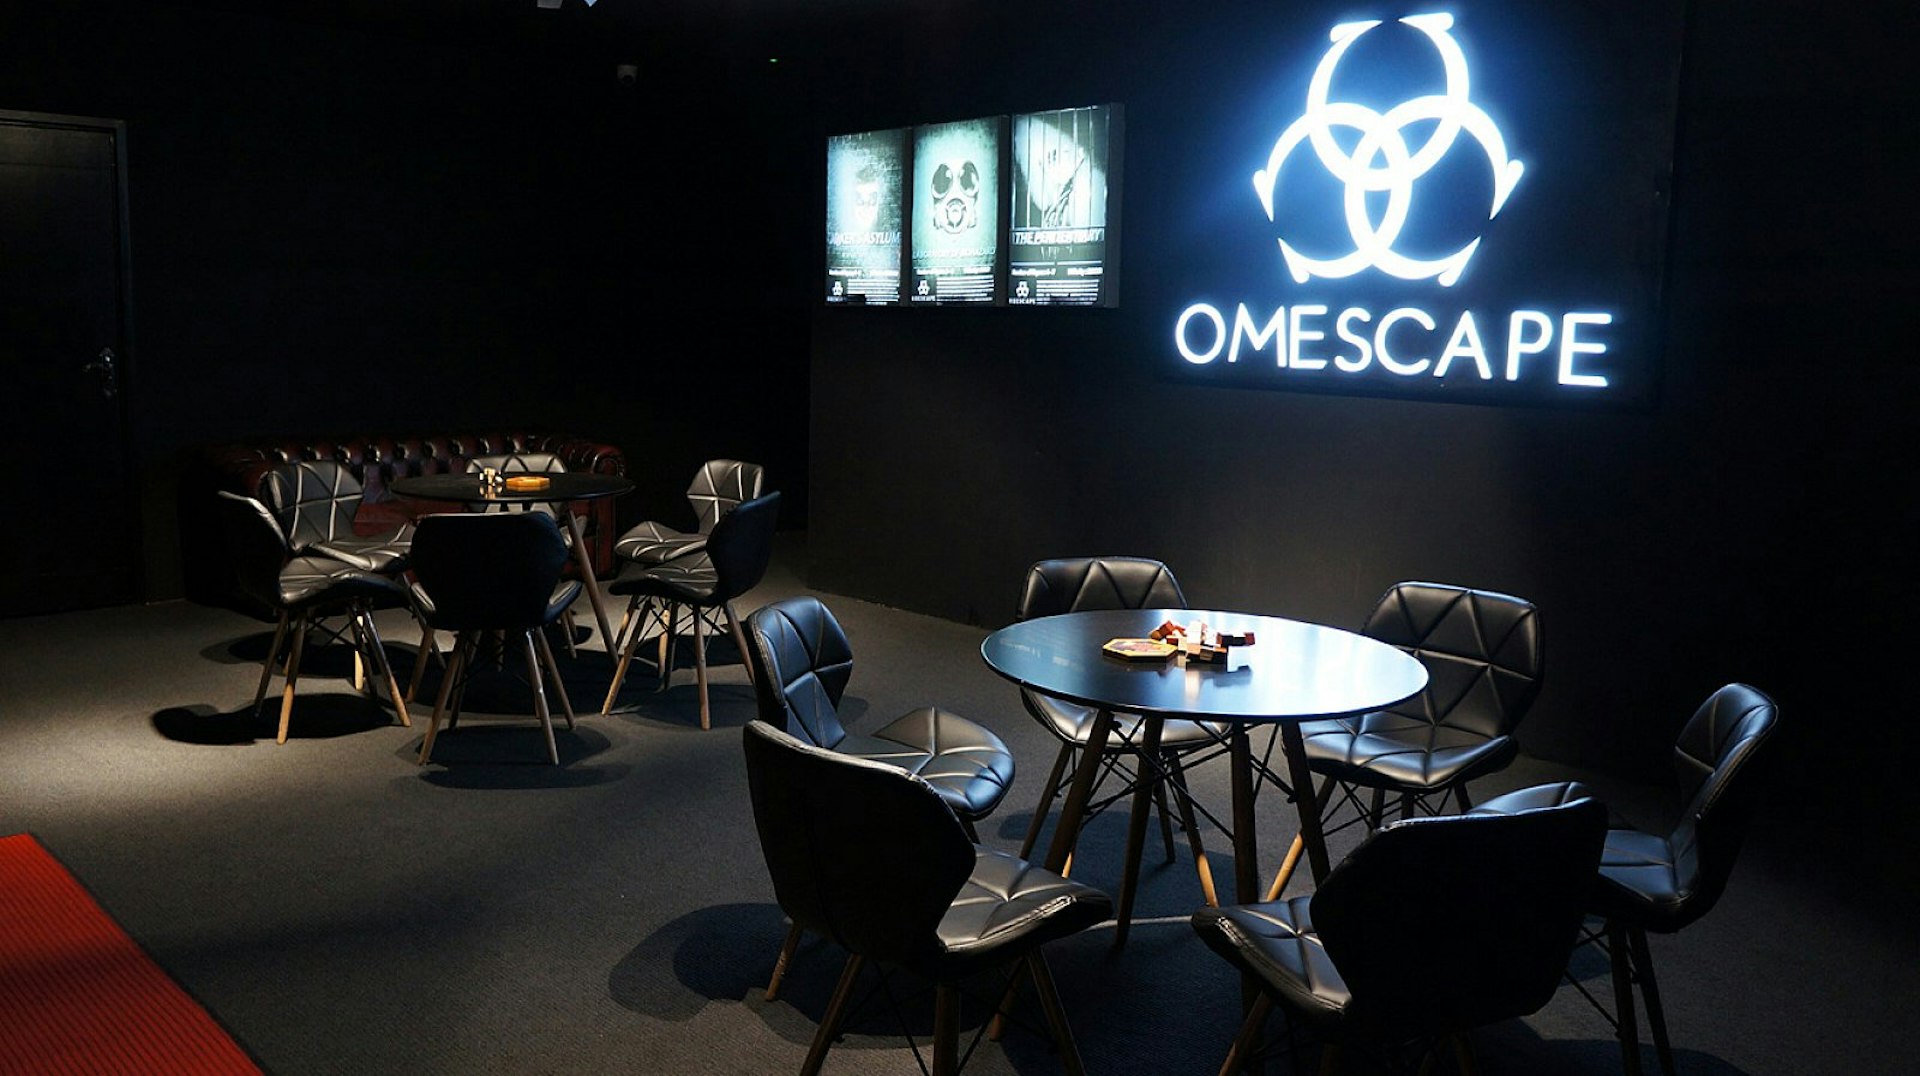 The interior of a dark room, with leather chairs arranged around tables; on the wall is a sign saying Omescape, below a stylised biohazard symbol.